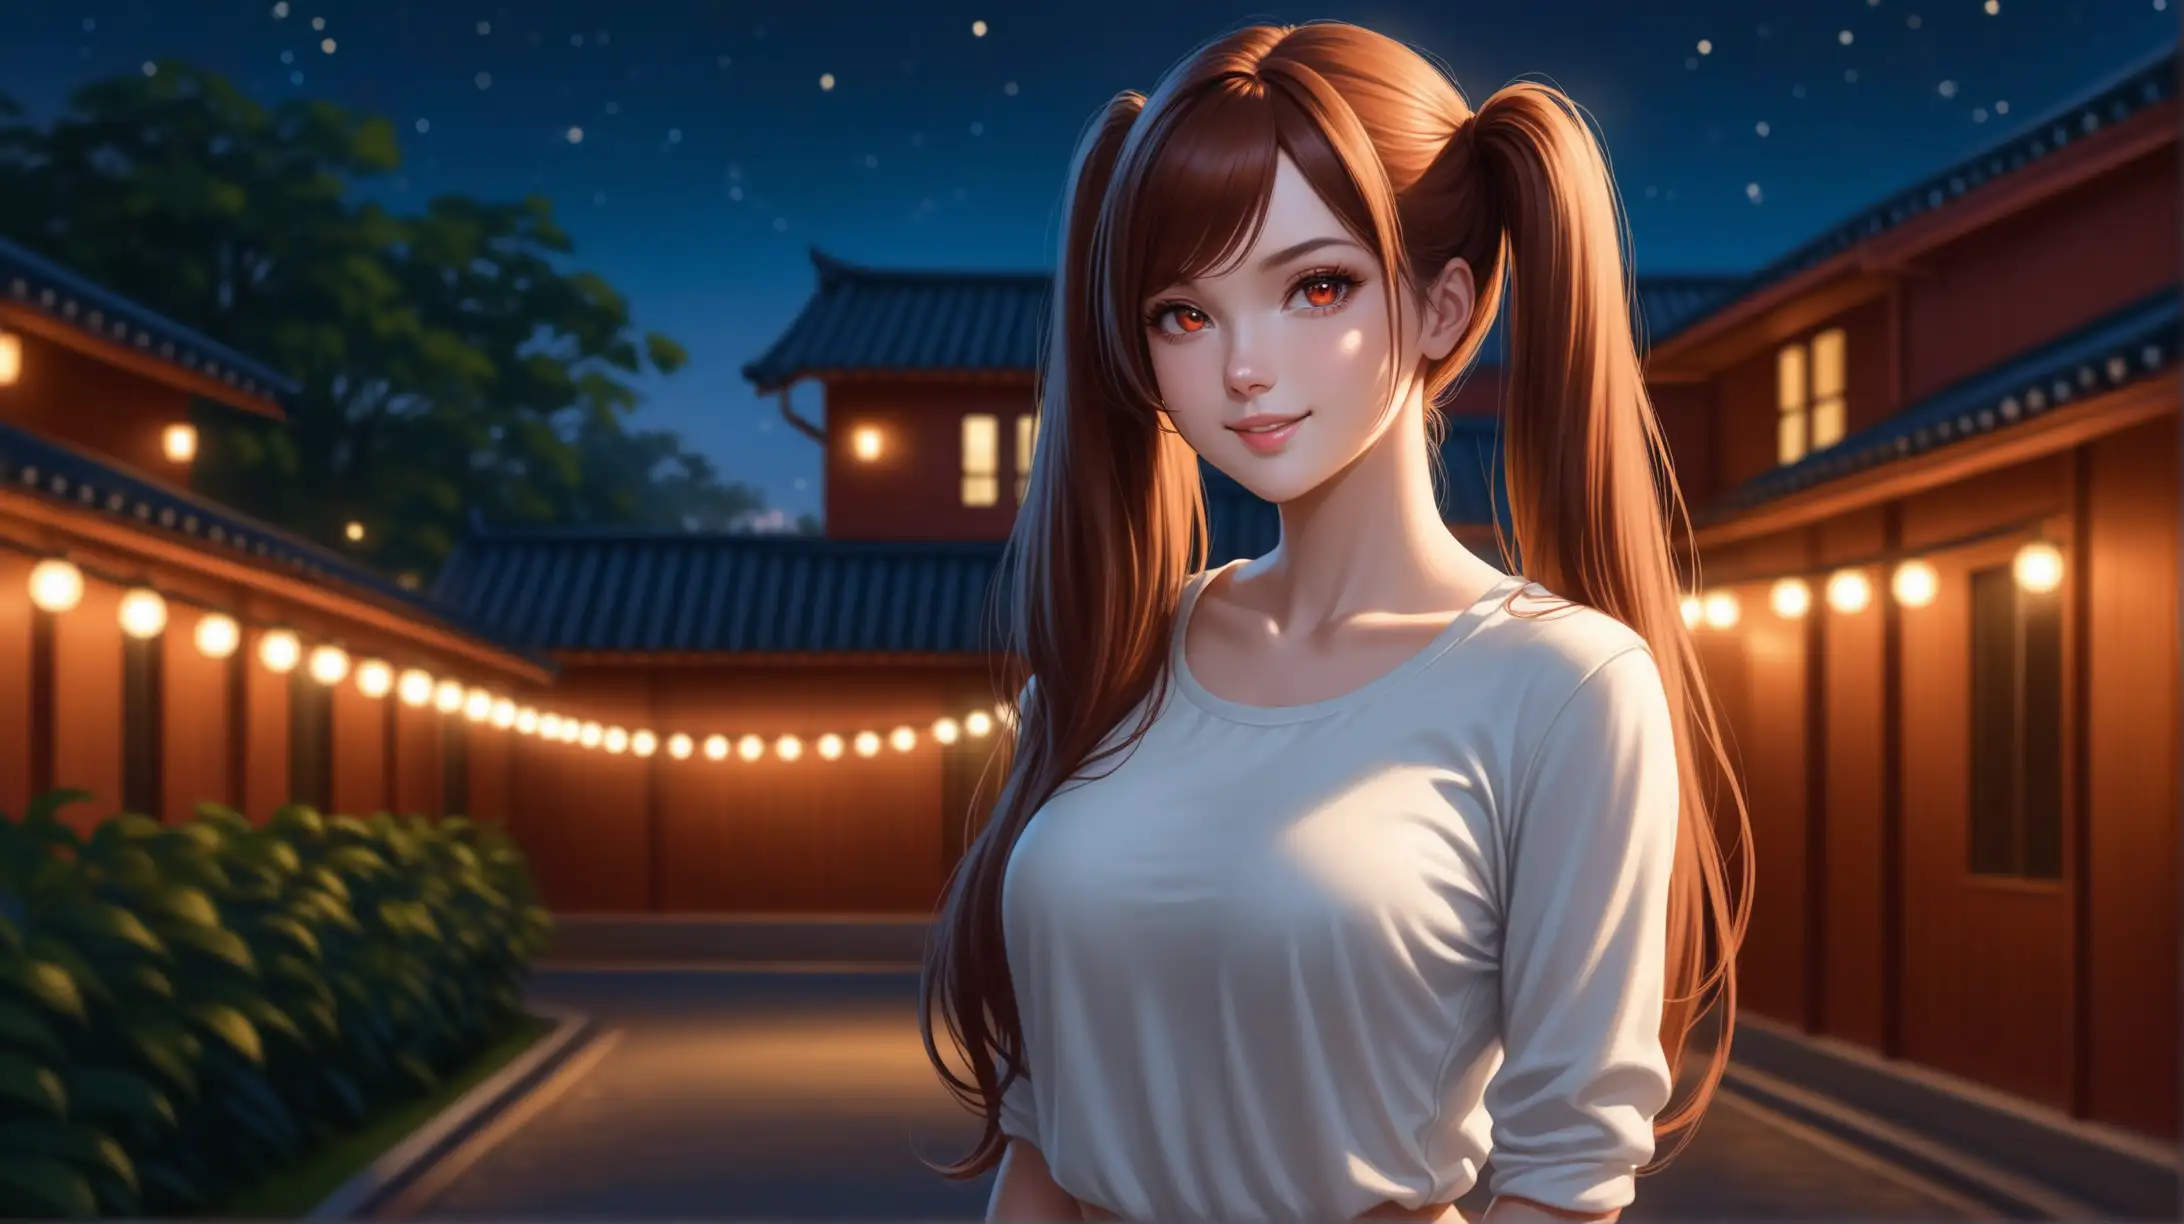 Draw a woman, extremely long reddish-brown hair, two high parted twintails, side locks, side-swept bangs, scarlet eyes, perky figure, high quality, realistic, accurate, detailed, long shot, night lighting, outdoors, seductive pose, casual outfit, smiling at the viewer